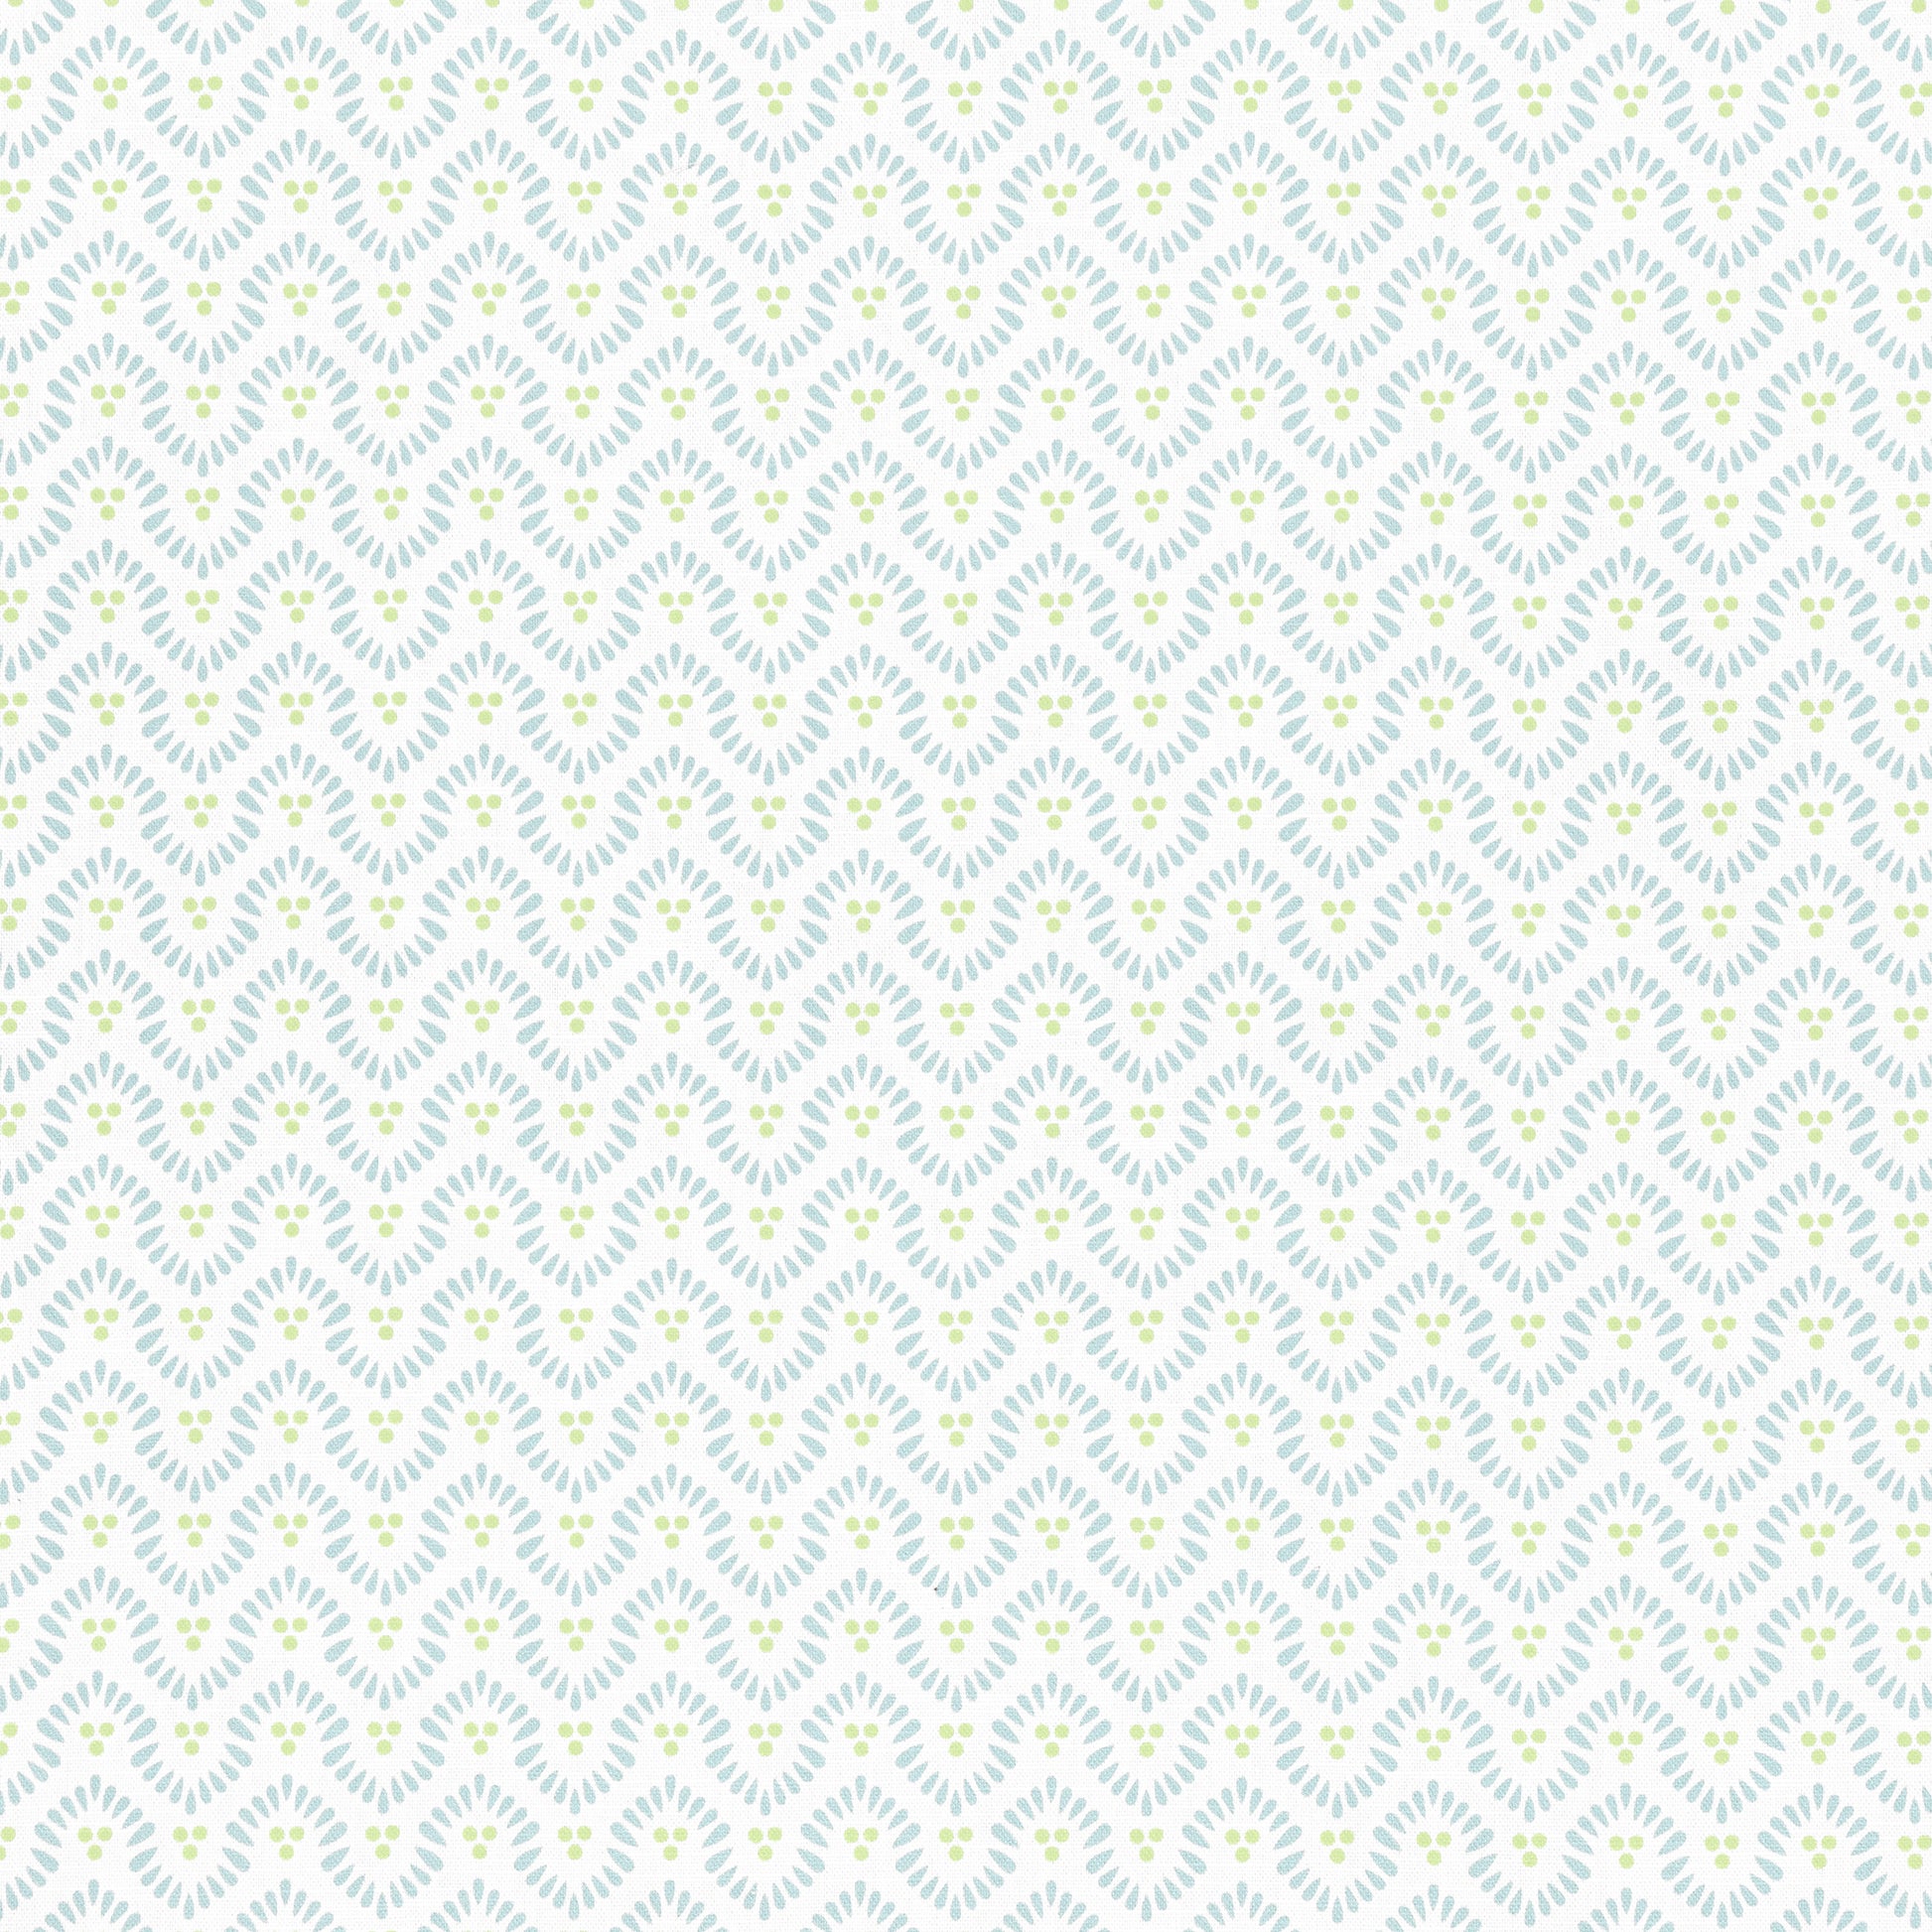 Purchase  Ann French Fabric Product AF23145  pattern name  Wynford